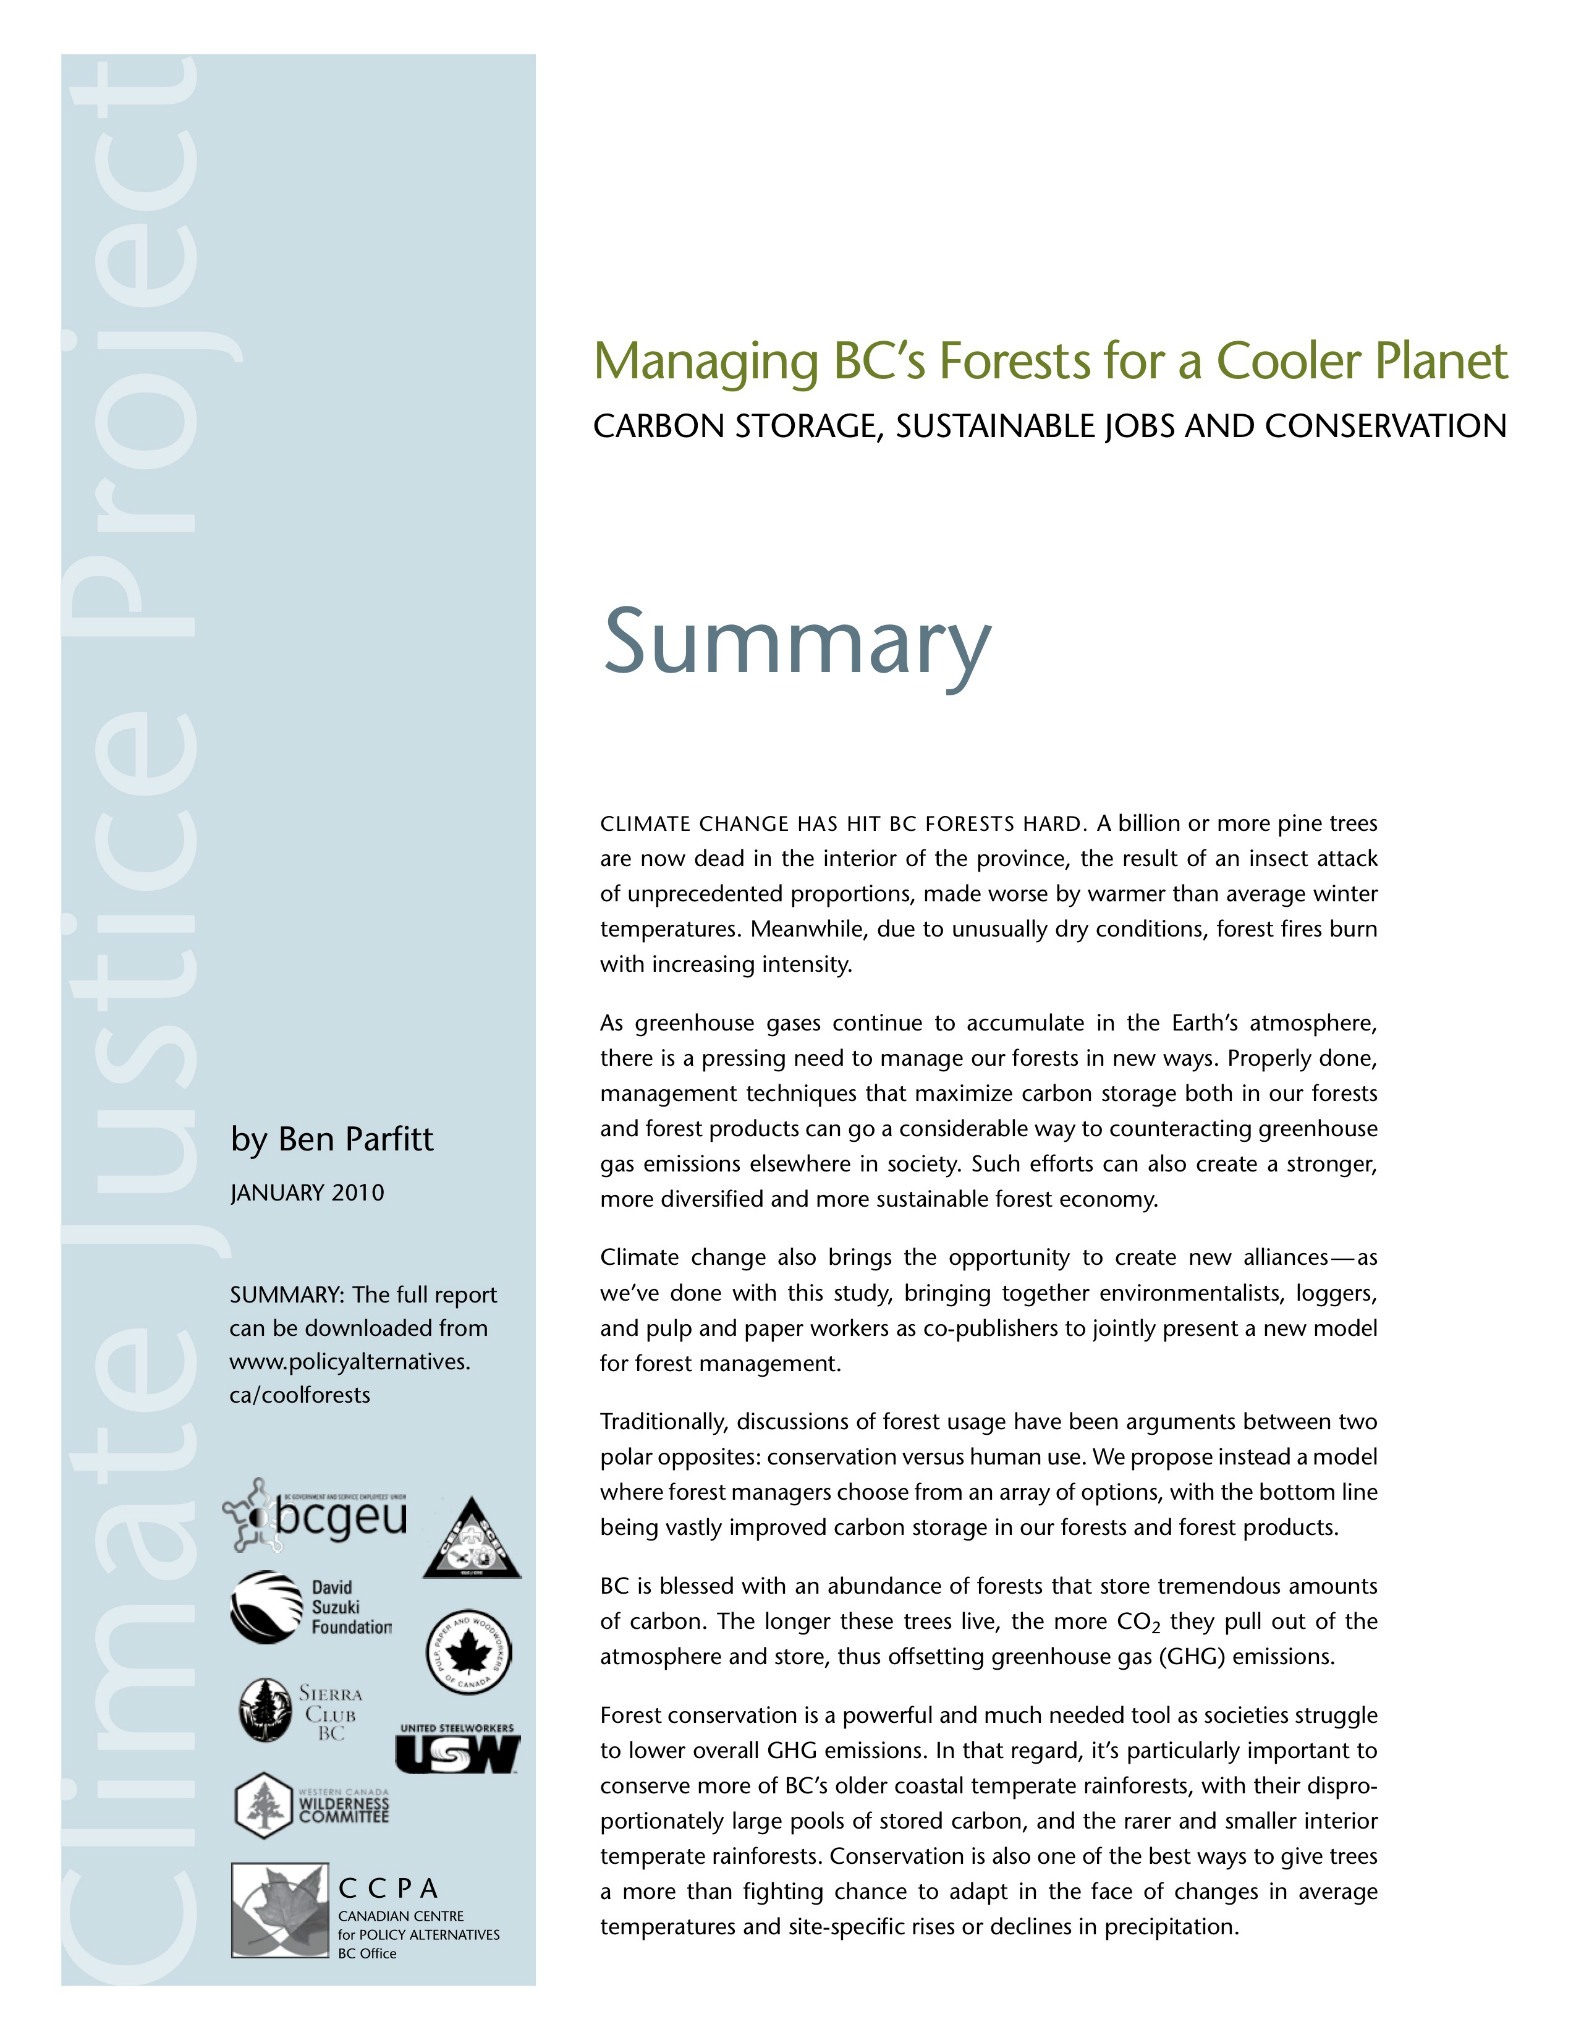 EXECUTIVE SUMMARY — Managing BC's Forests for a Cooler Planet: Carbon Storage, Sustainable Jobs and Conservation